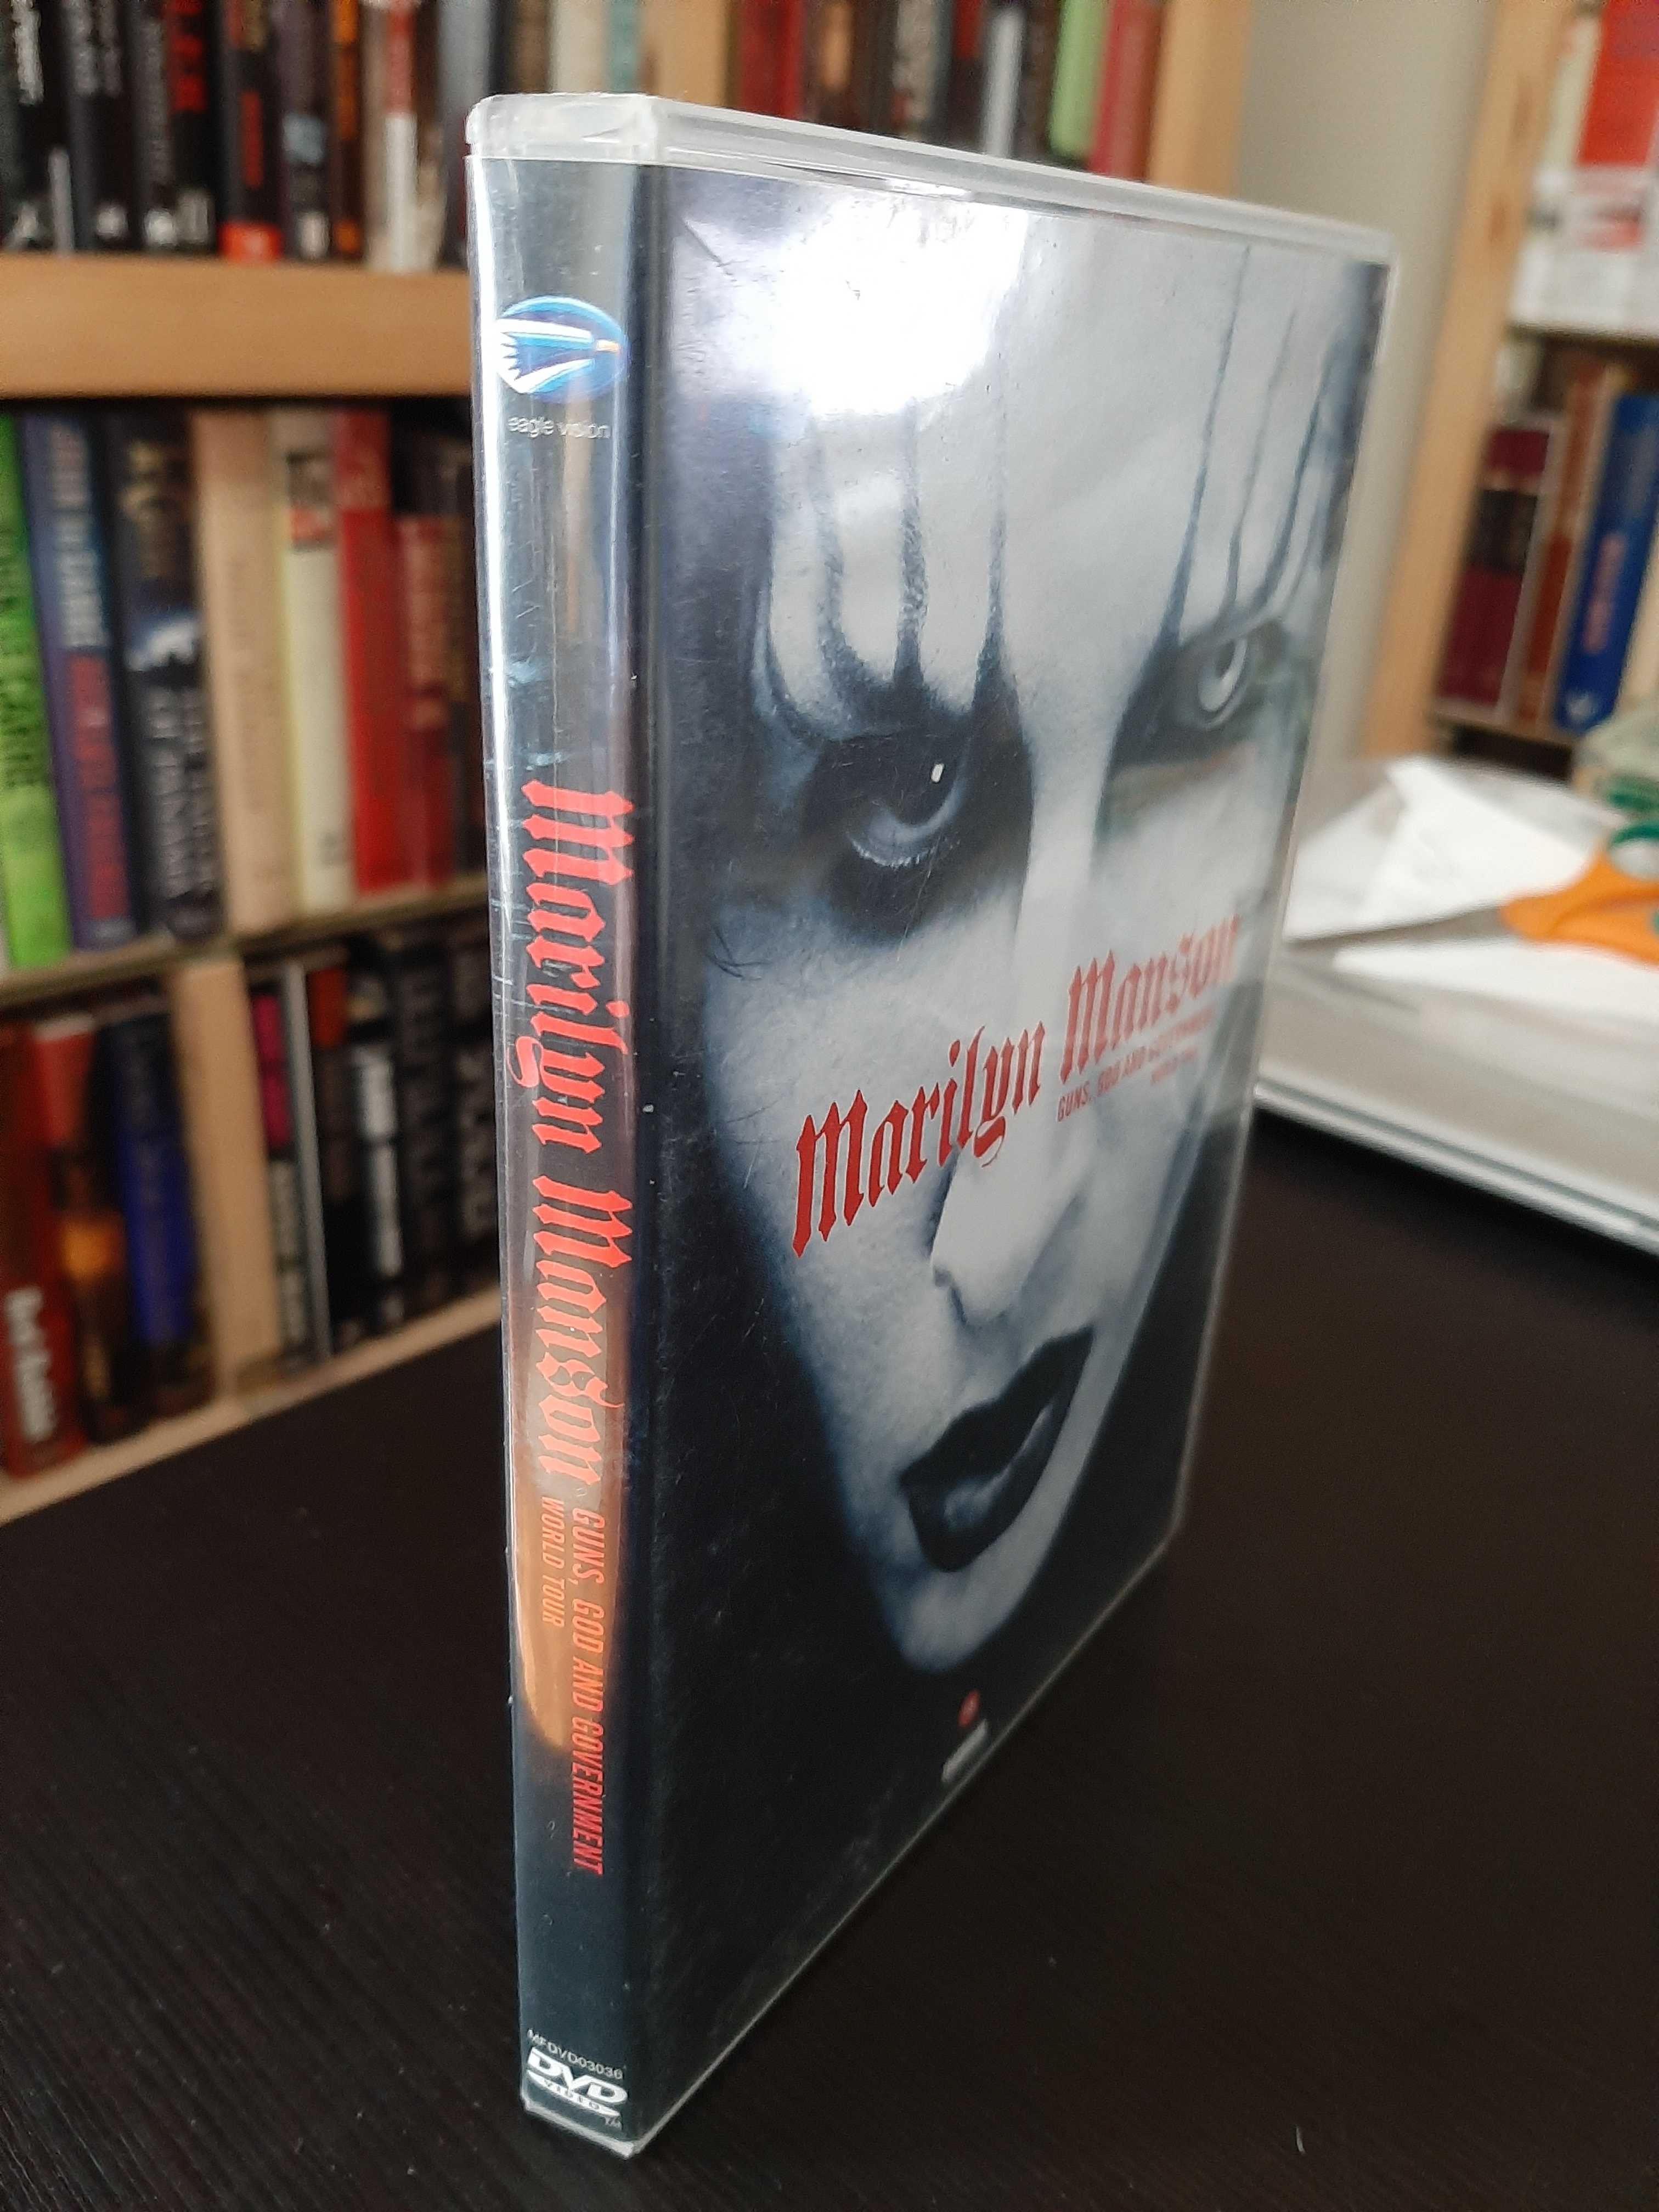 Marilyn Manson - Guns, God and Government - Live 2002 - DVD